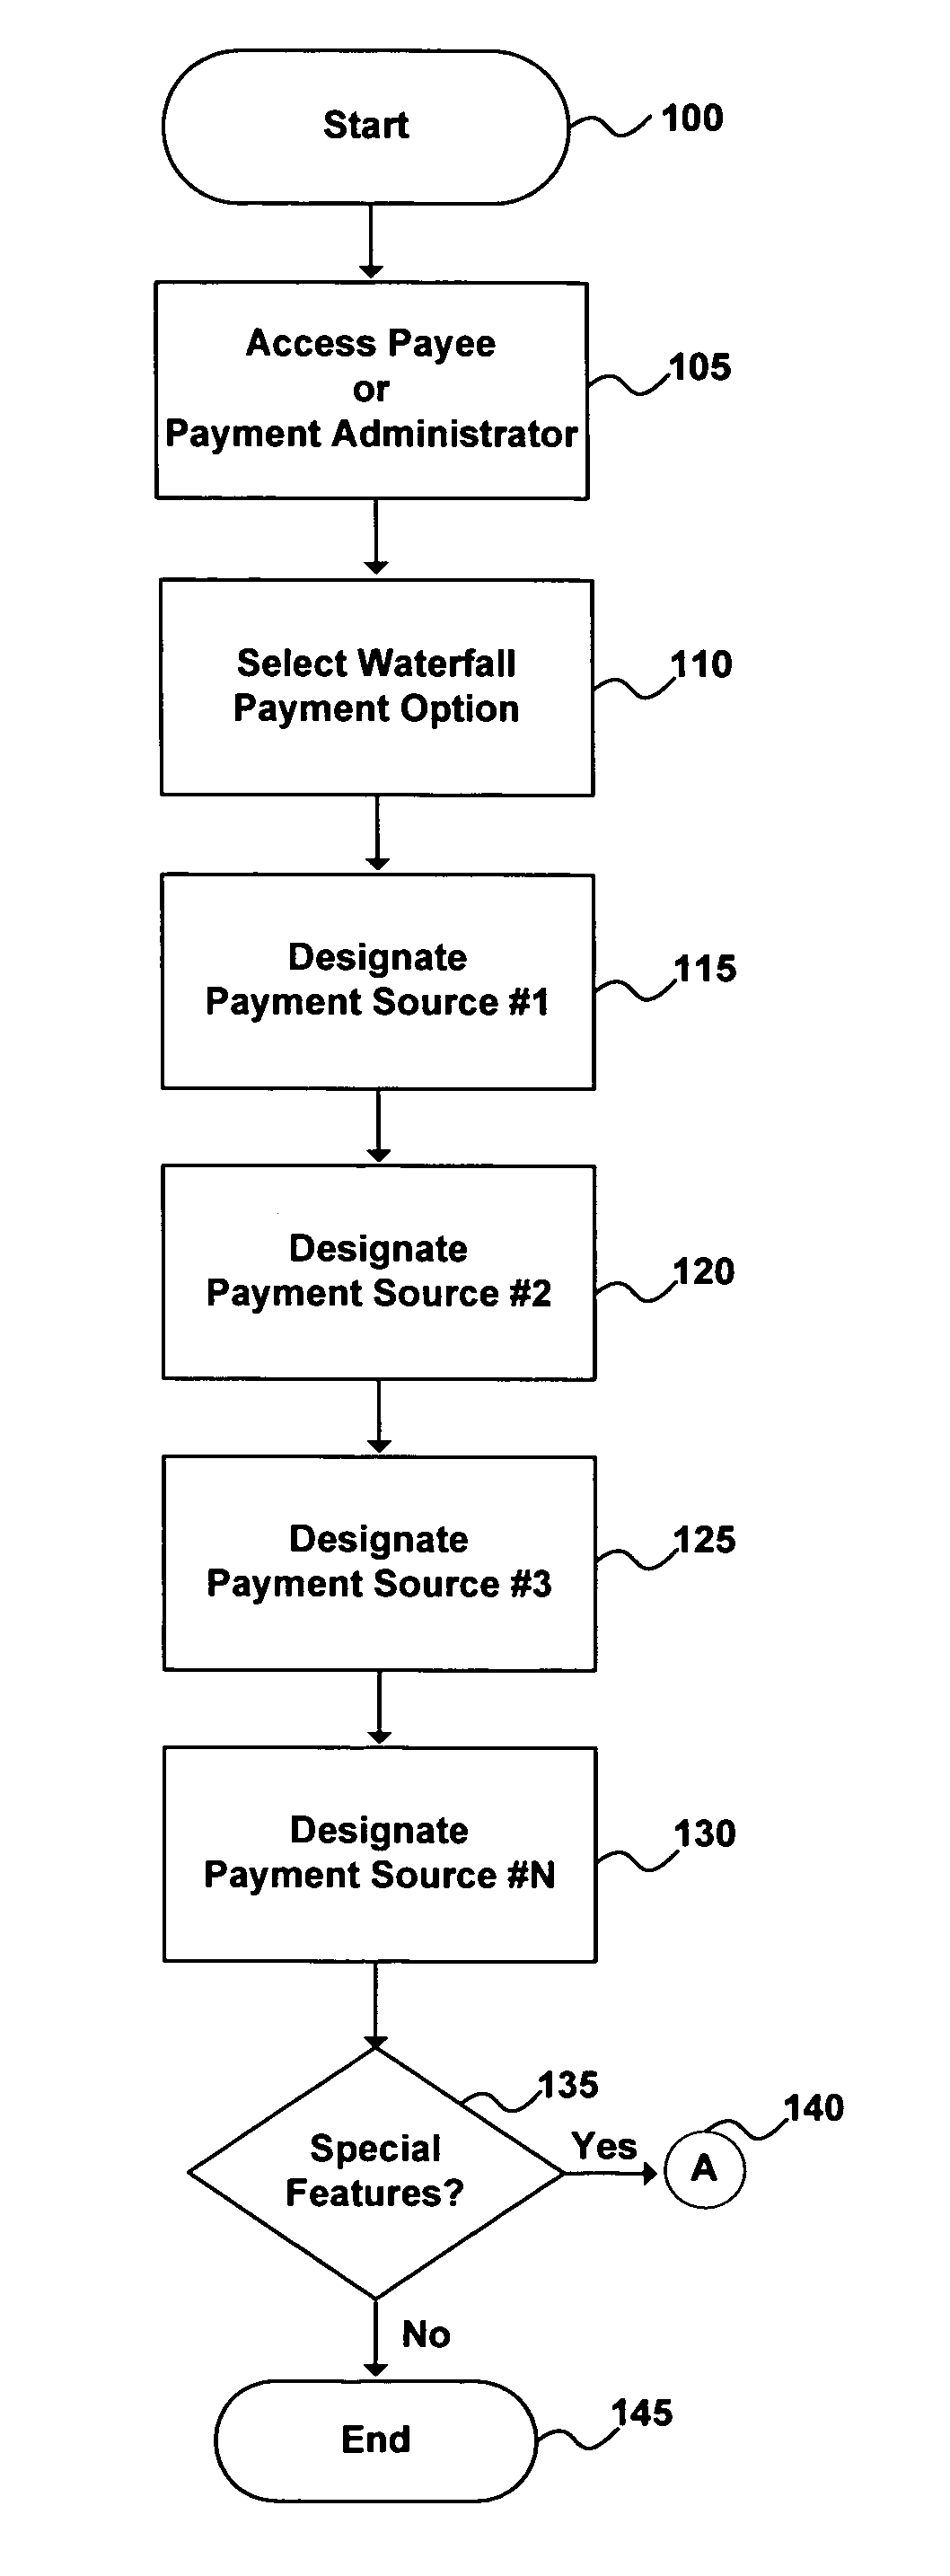 Waterfall prioritized payment processing